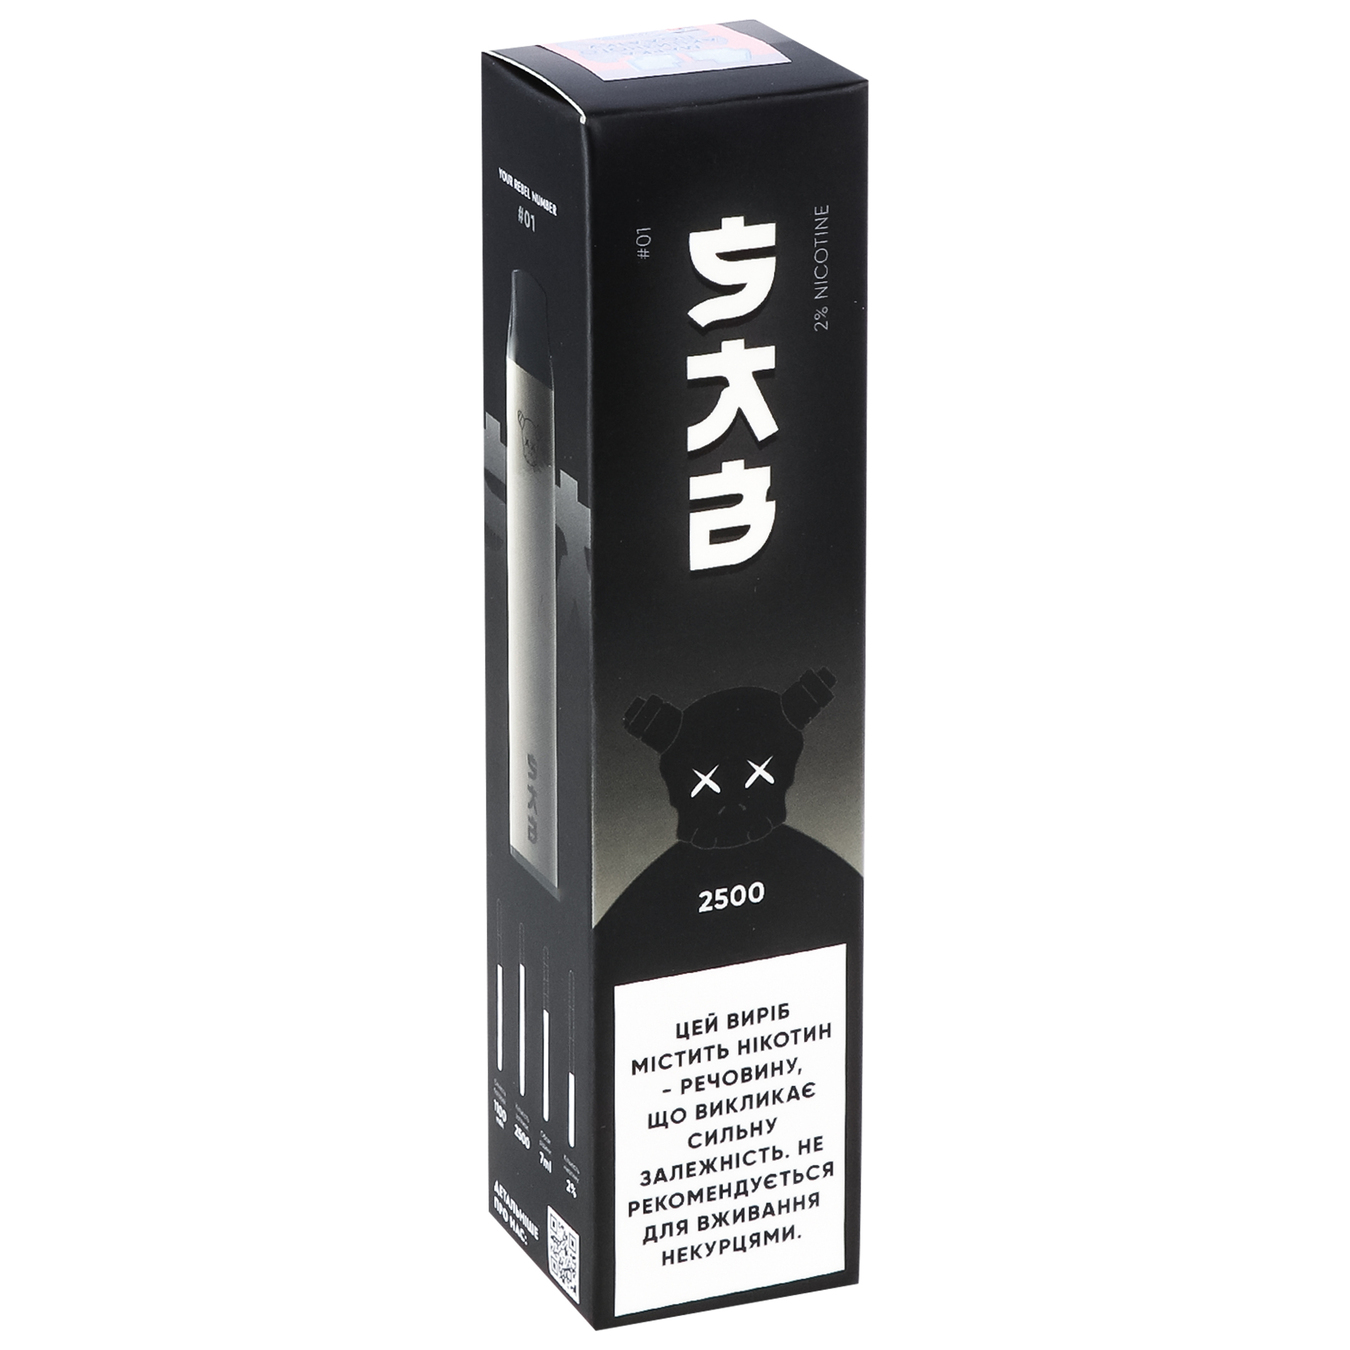 Vaporizer SAB 2500 No. 1 Heisenberg Menthol 2% 7ml (the price is without excise tax) 3